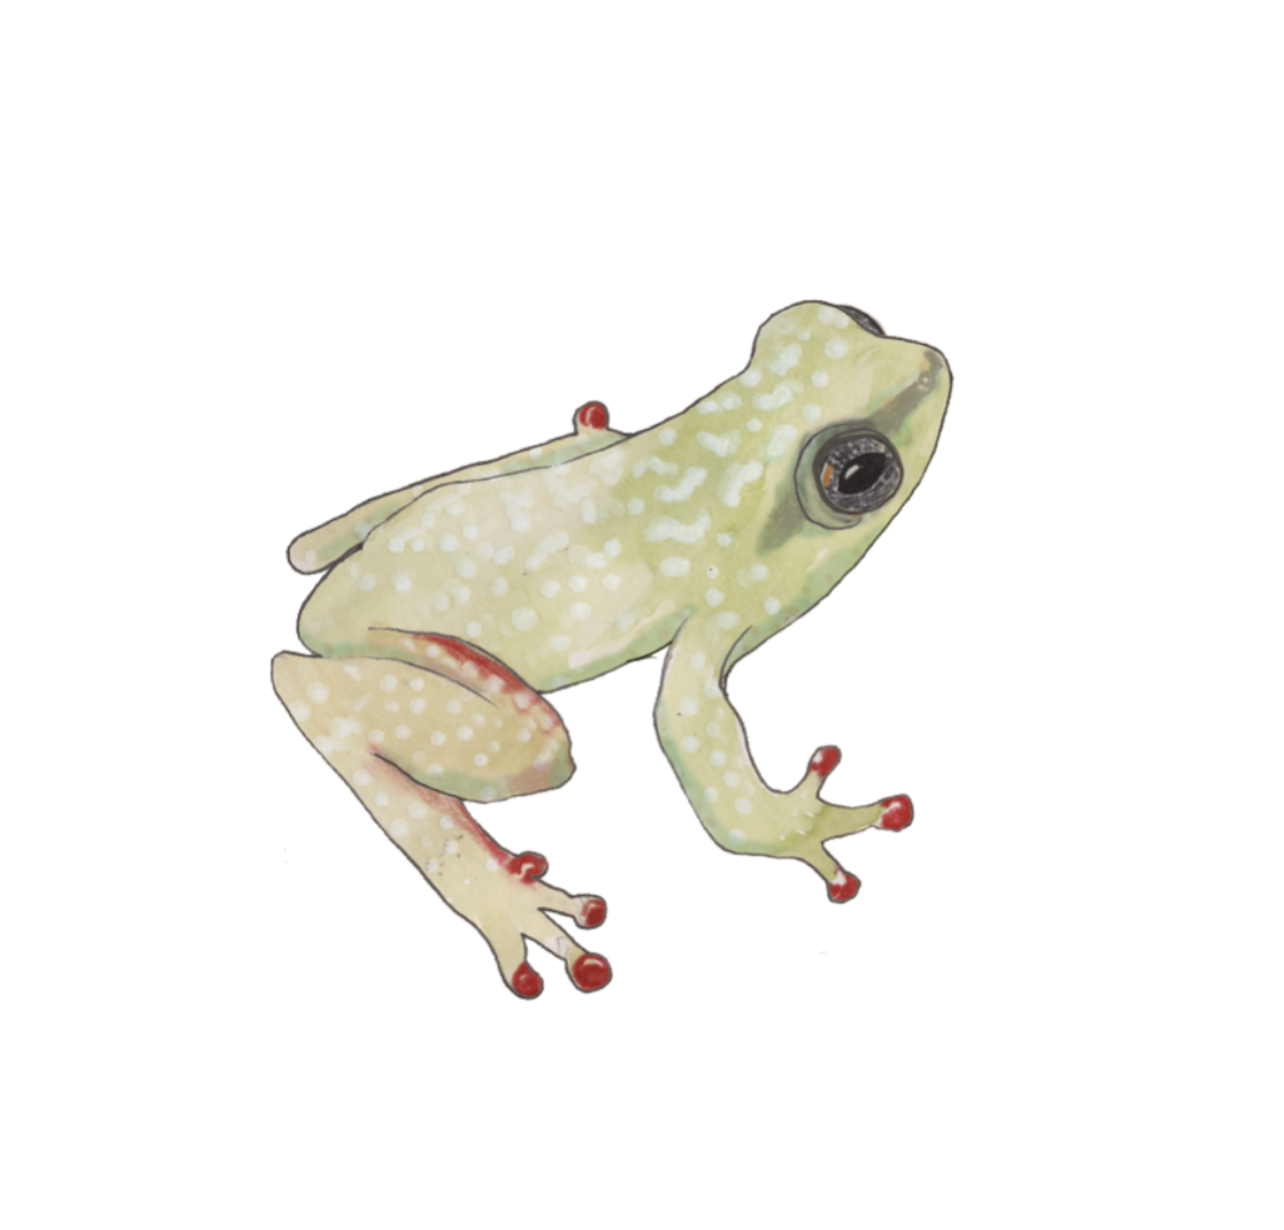 Dotted reed frog